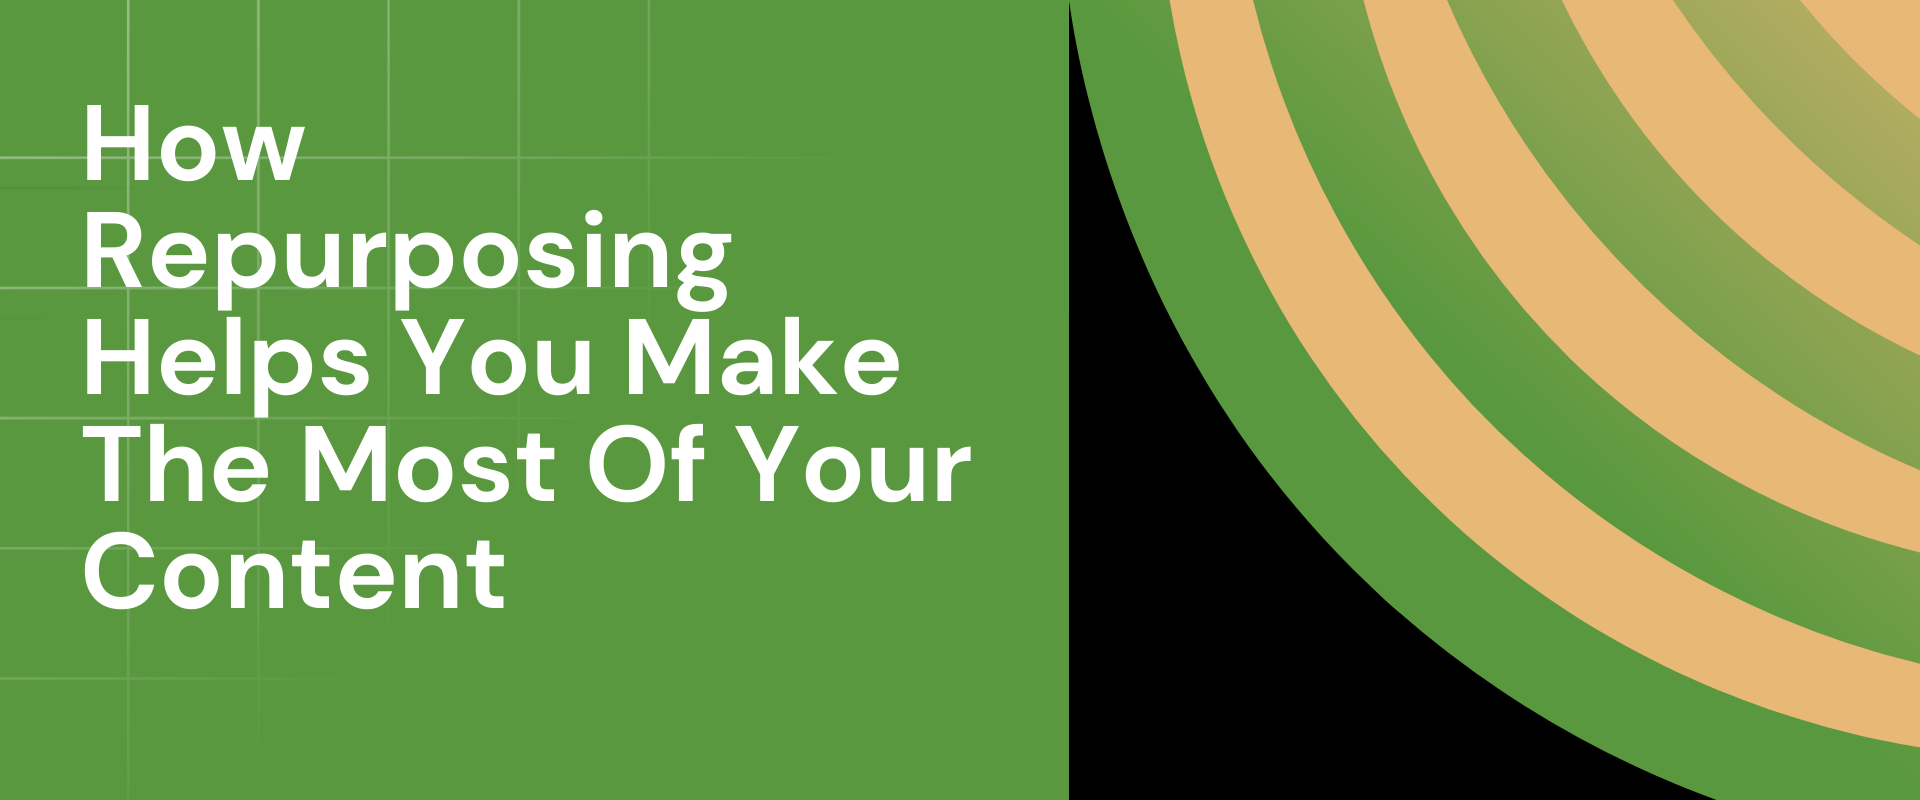 How Repurposing Helps You Make The Most Of Your Content